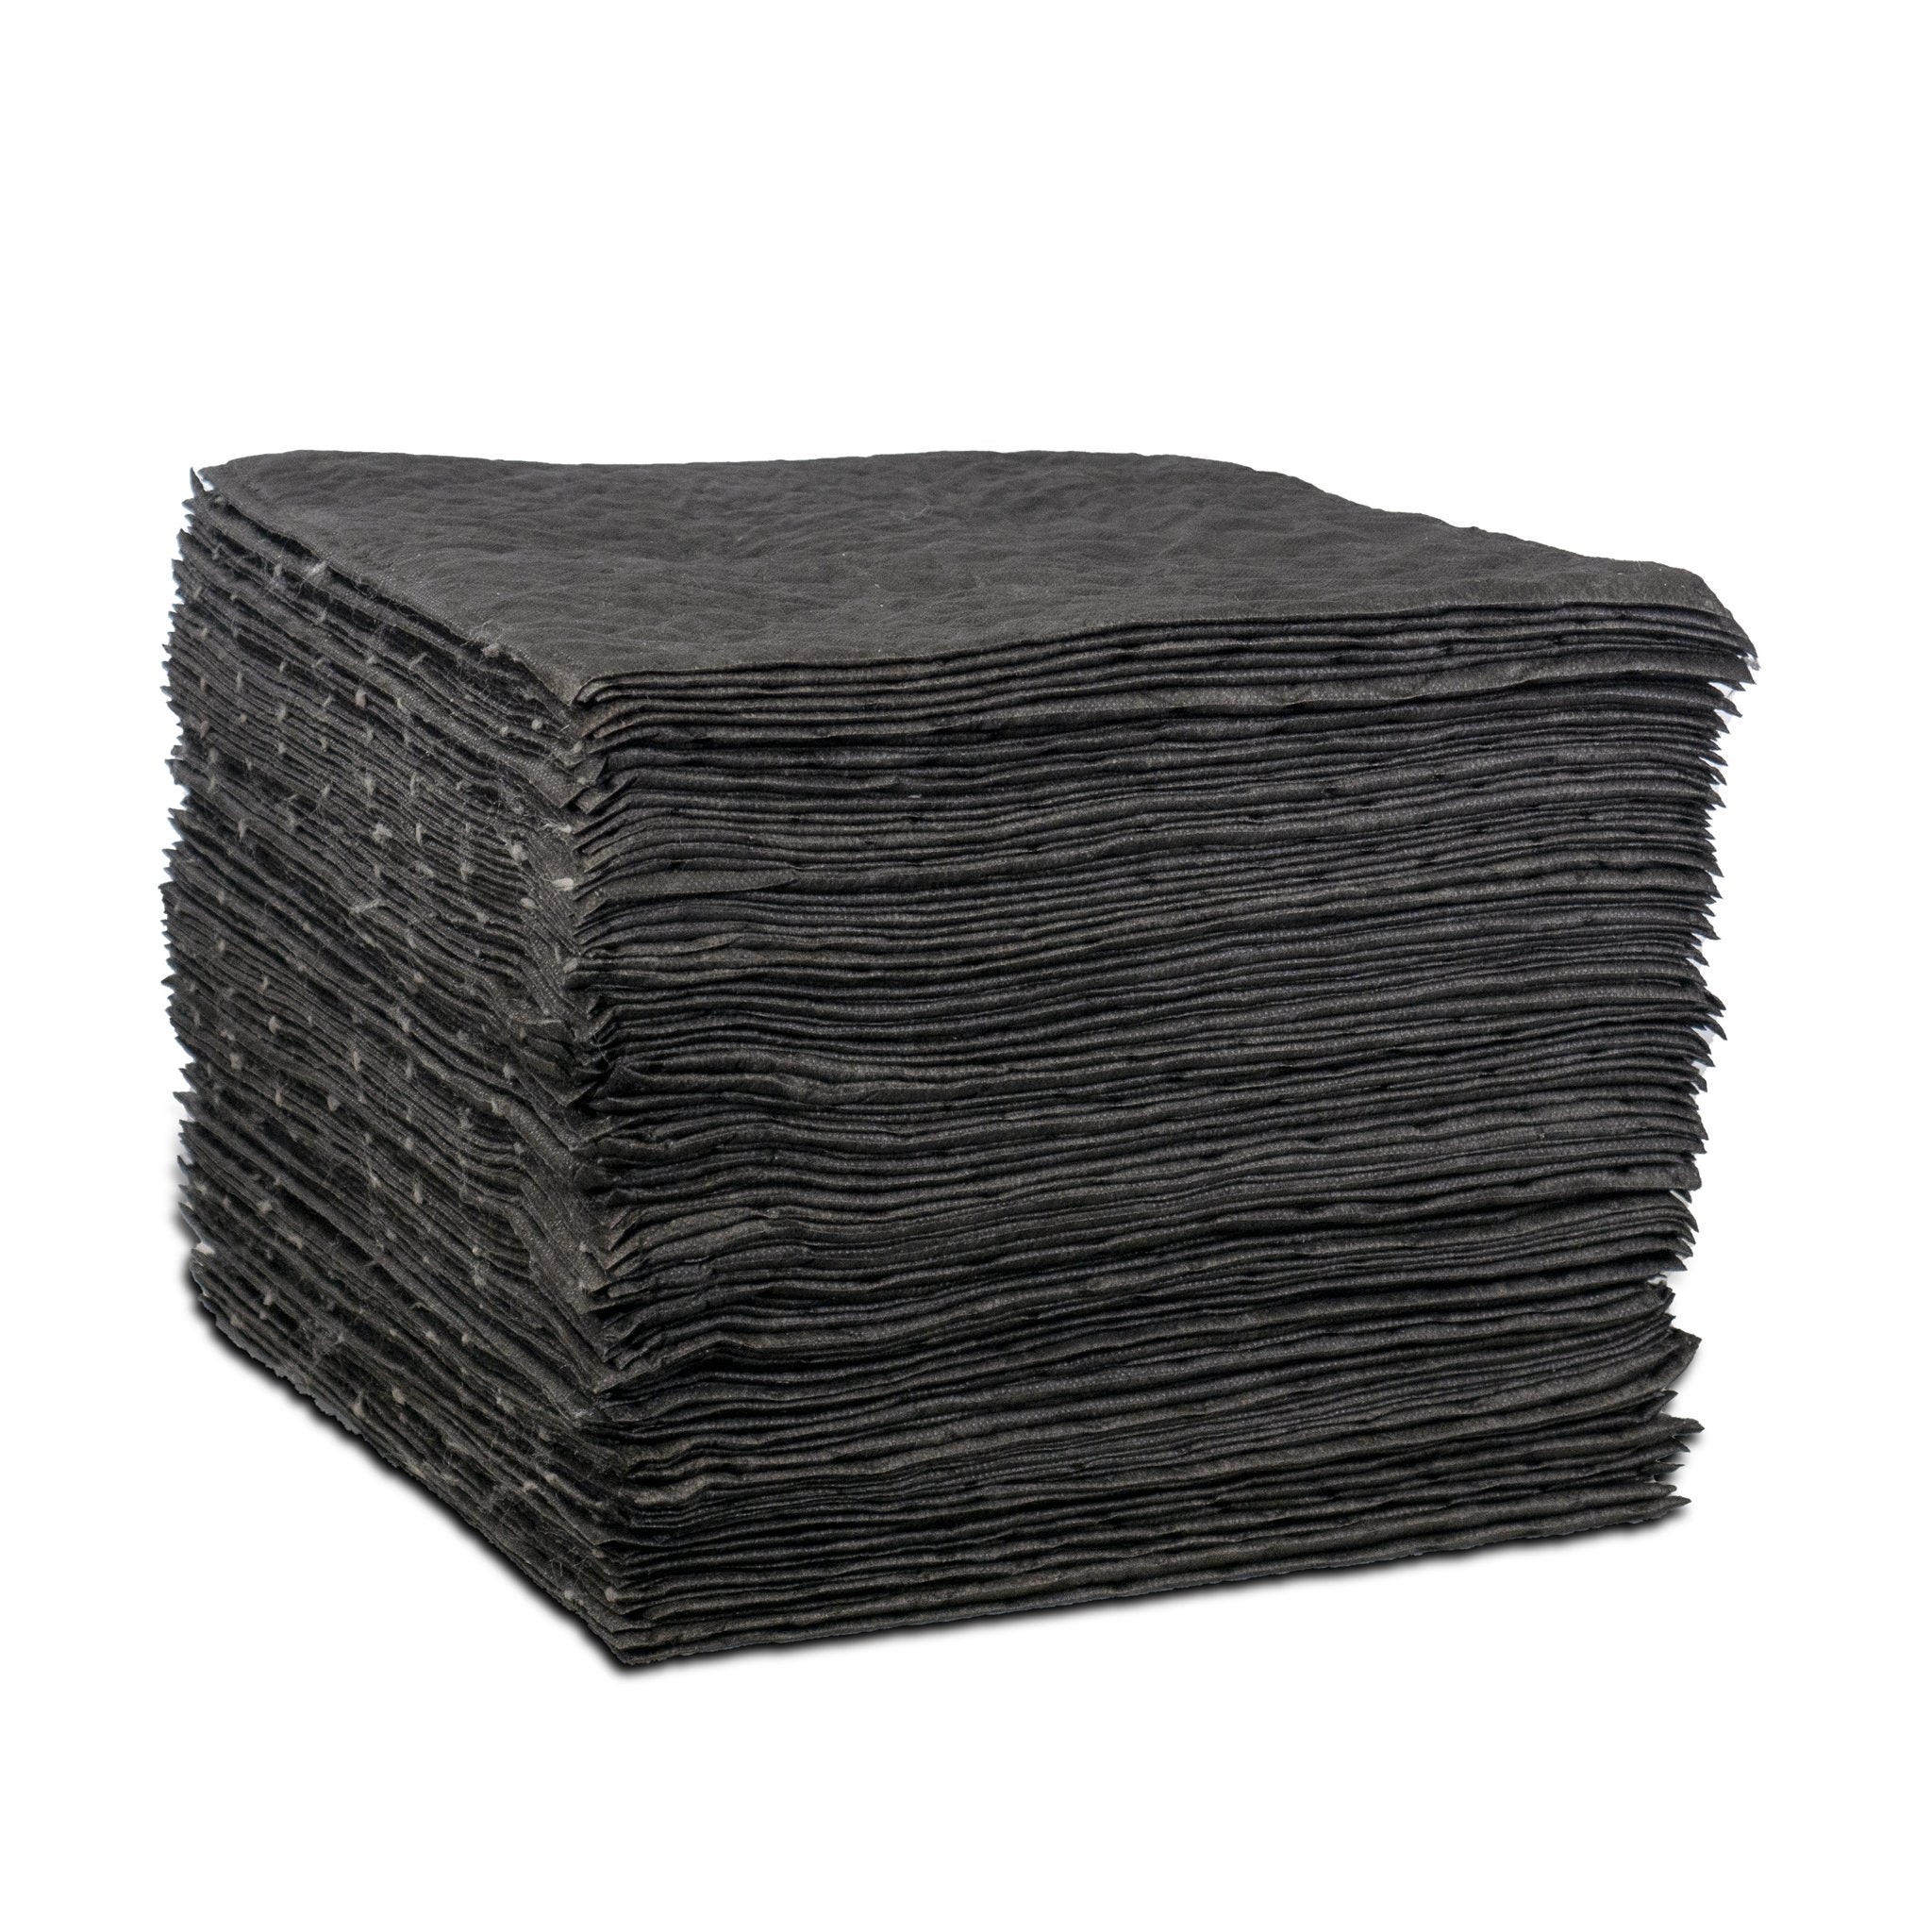 Recycled FiberLink Universal Heavy-weight Absorbent Pads - 100/BALE-eSafety Supplies, Inc